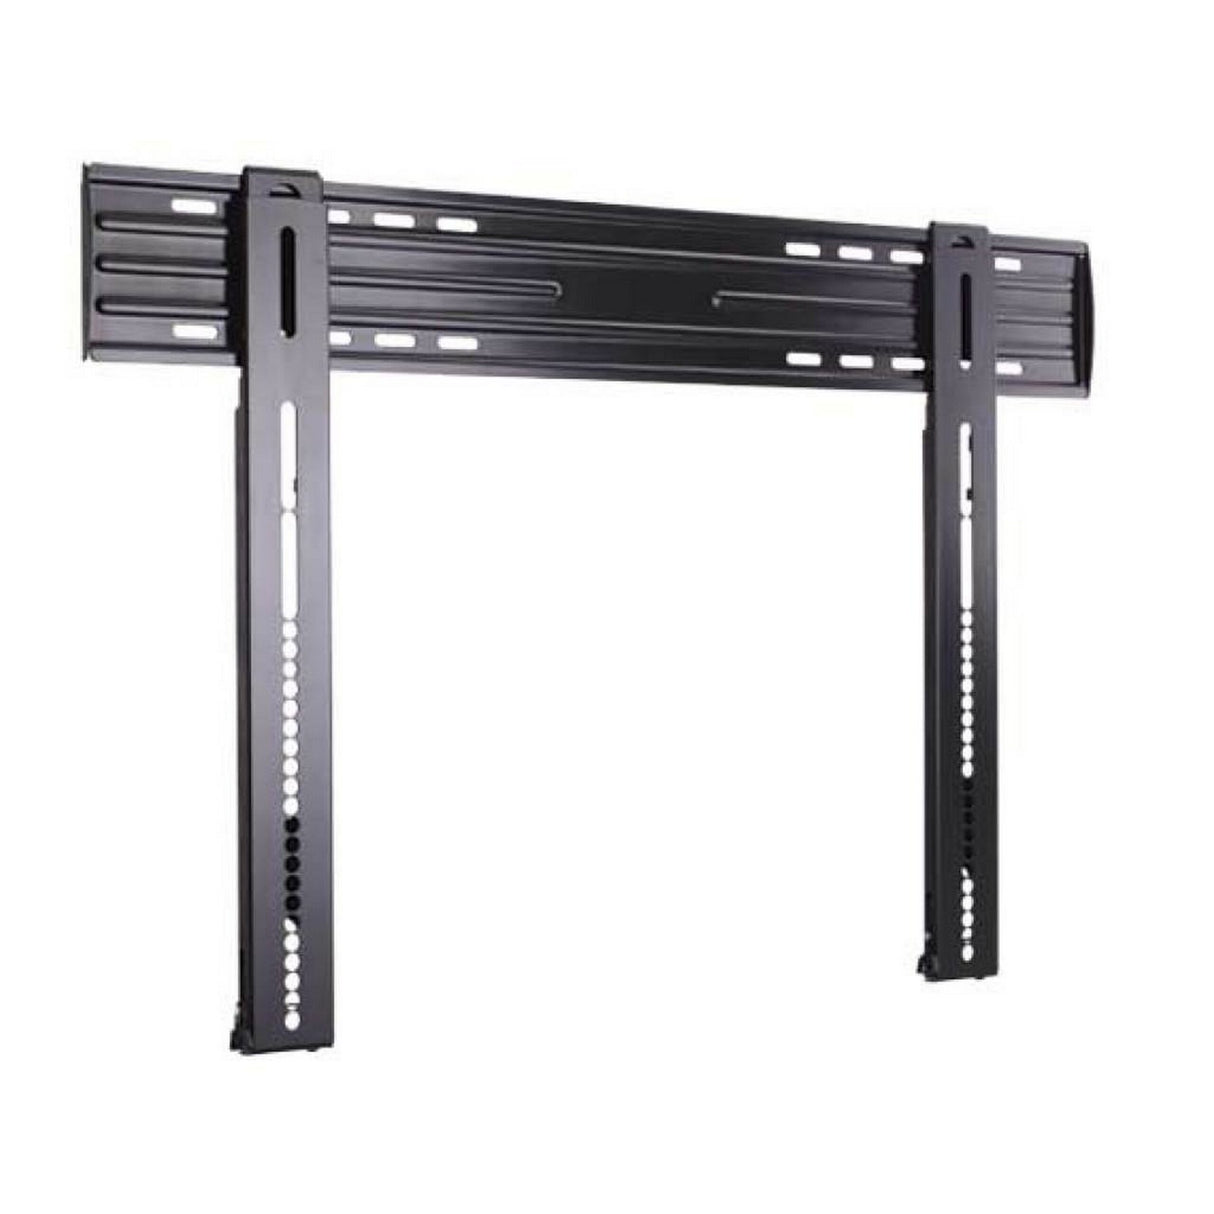 Sanus LL11-B1 HDPro Super Slim Fixed-Position Wall Mount for 40-85 Inch Flat-Panel TVs